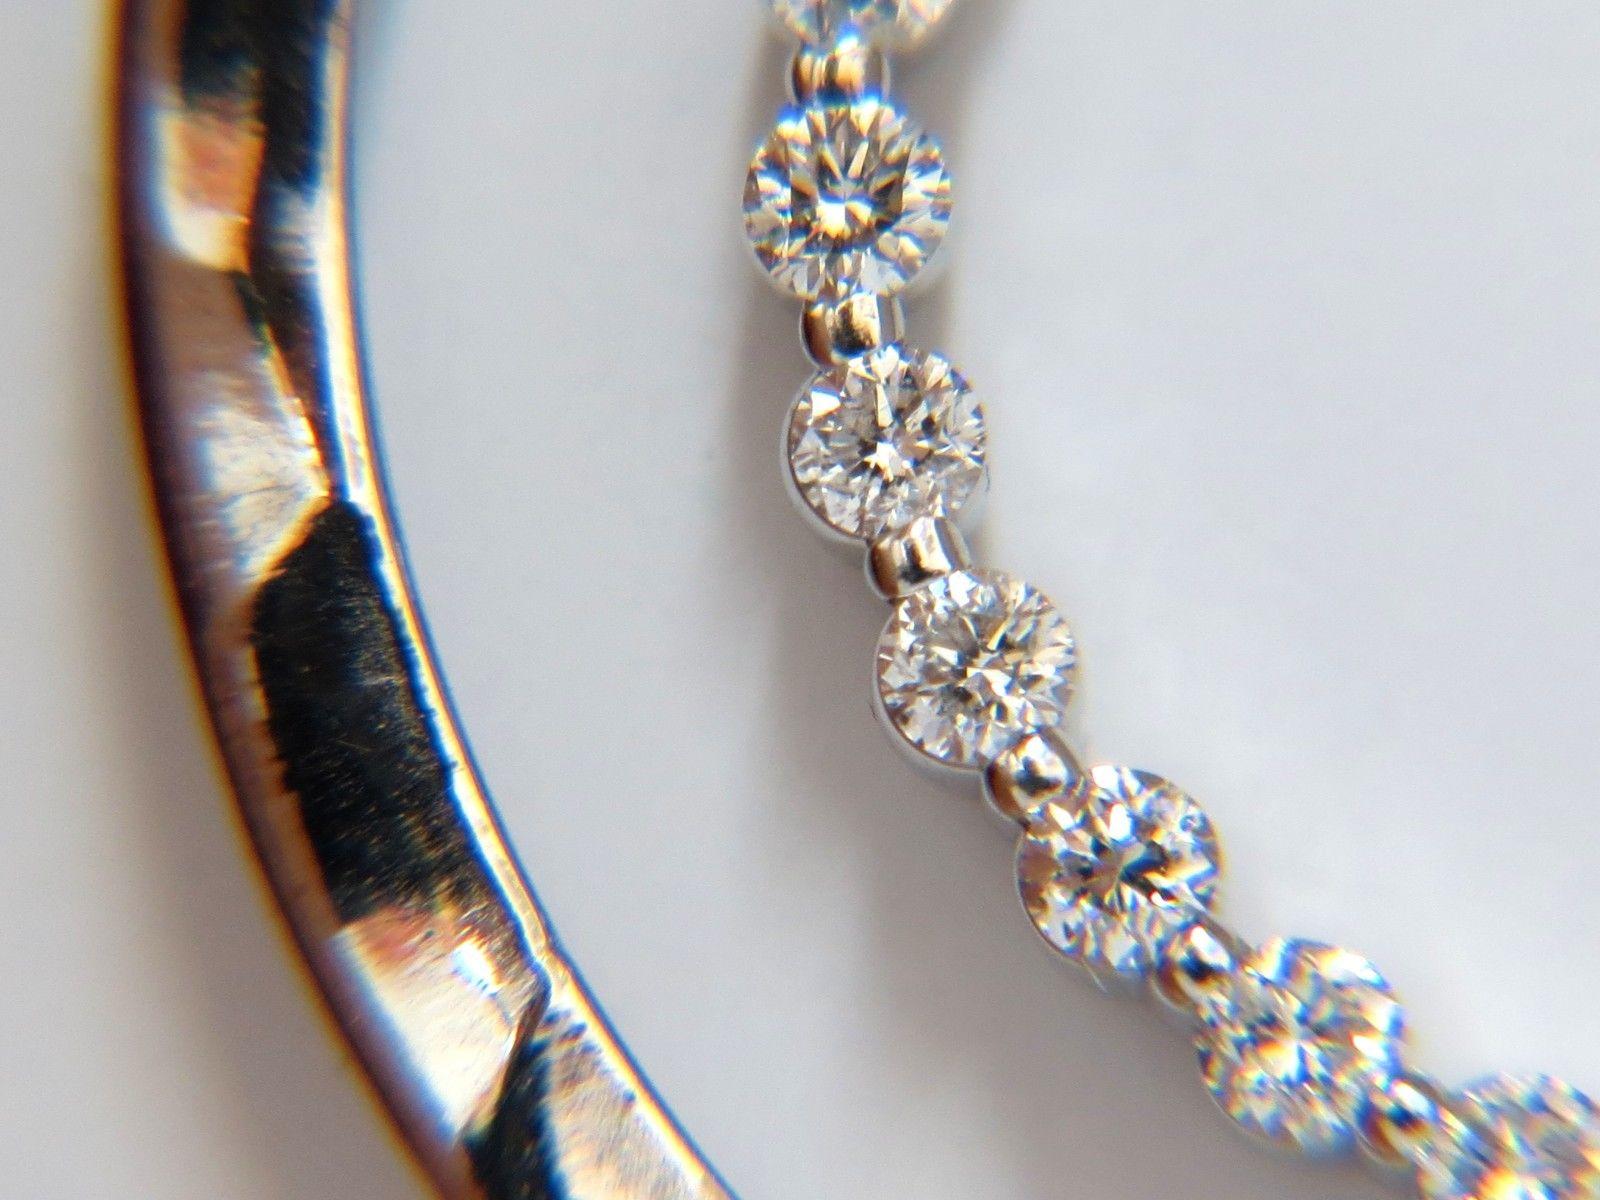 Circle within Circle.

1.00ct. round diamonds circle & Diamonds station necklace.

 Full cut brilliant Round diamonds.

 Vs-2  Clarity. 

G-H color.

14kt. white gold 

Diameter: 1.1 inch.

Necklace: 16 inches.

12 grams.

$6,000 Appraisal